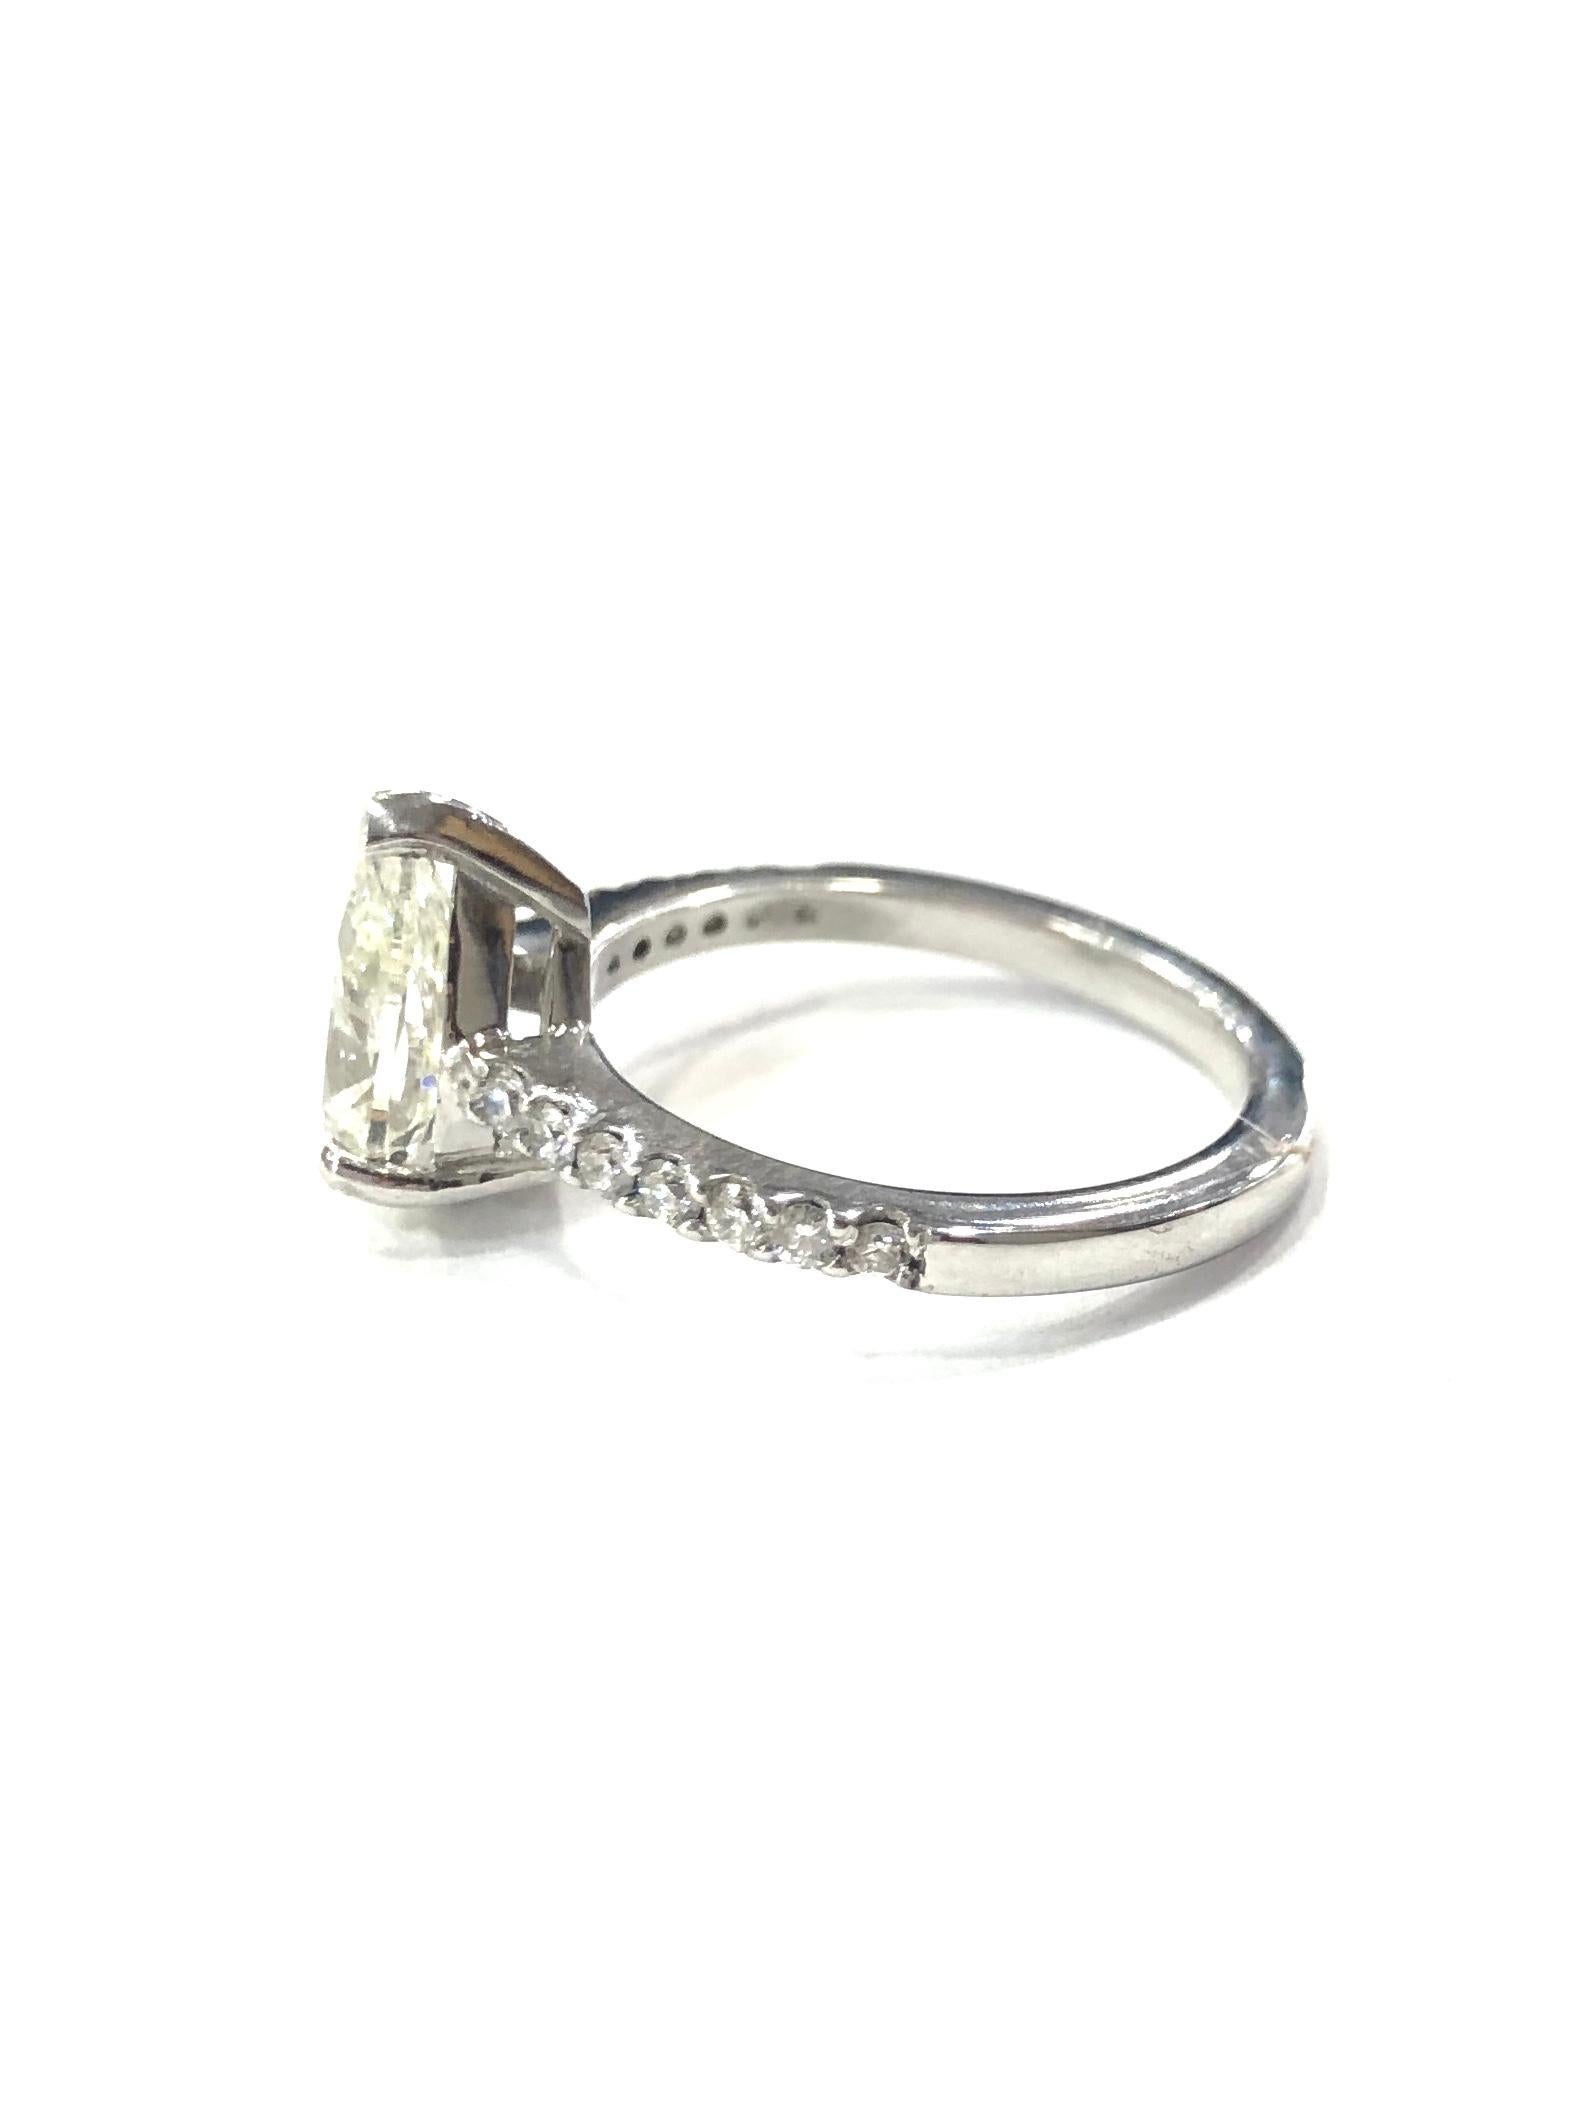 18ct White Gold Pear Shape Diamond Single Stone Engagement Ring. Set with one pear shape diamond set in a three claw setting.
Set with fourteen round brilliant cut diamonds on the shoulders. (seven each side)
Full English Hallmark

Approximate Pear